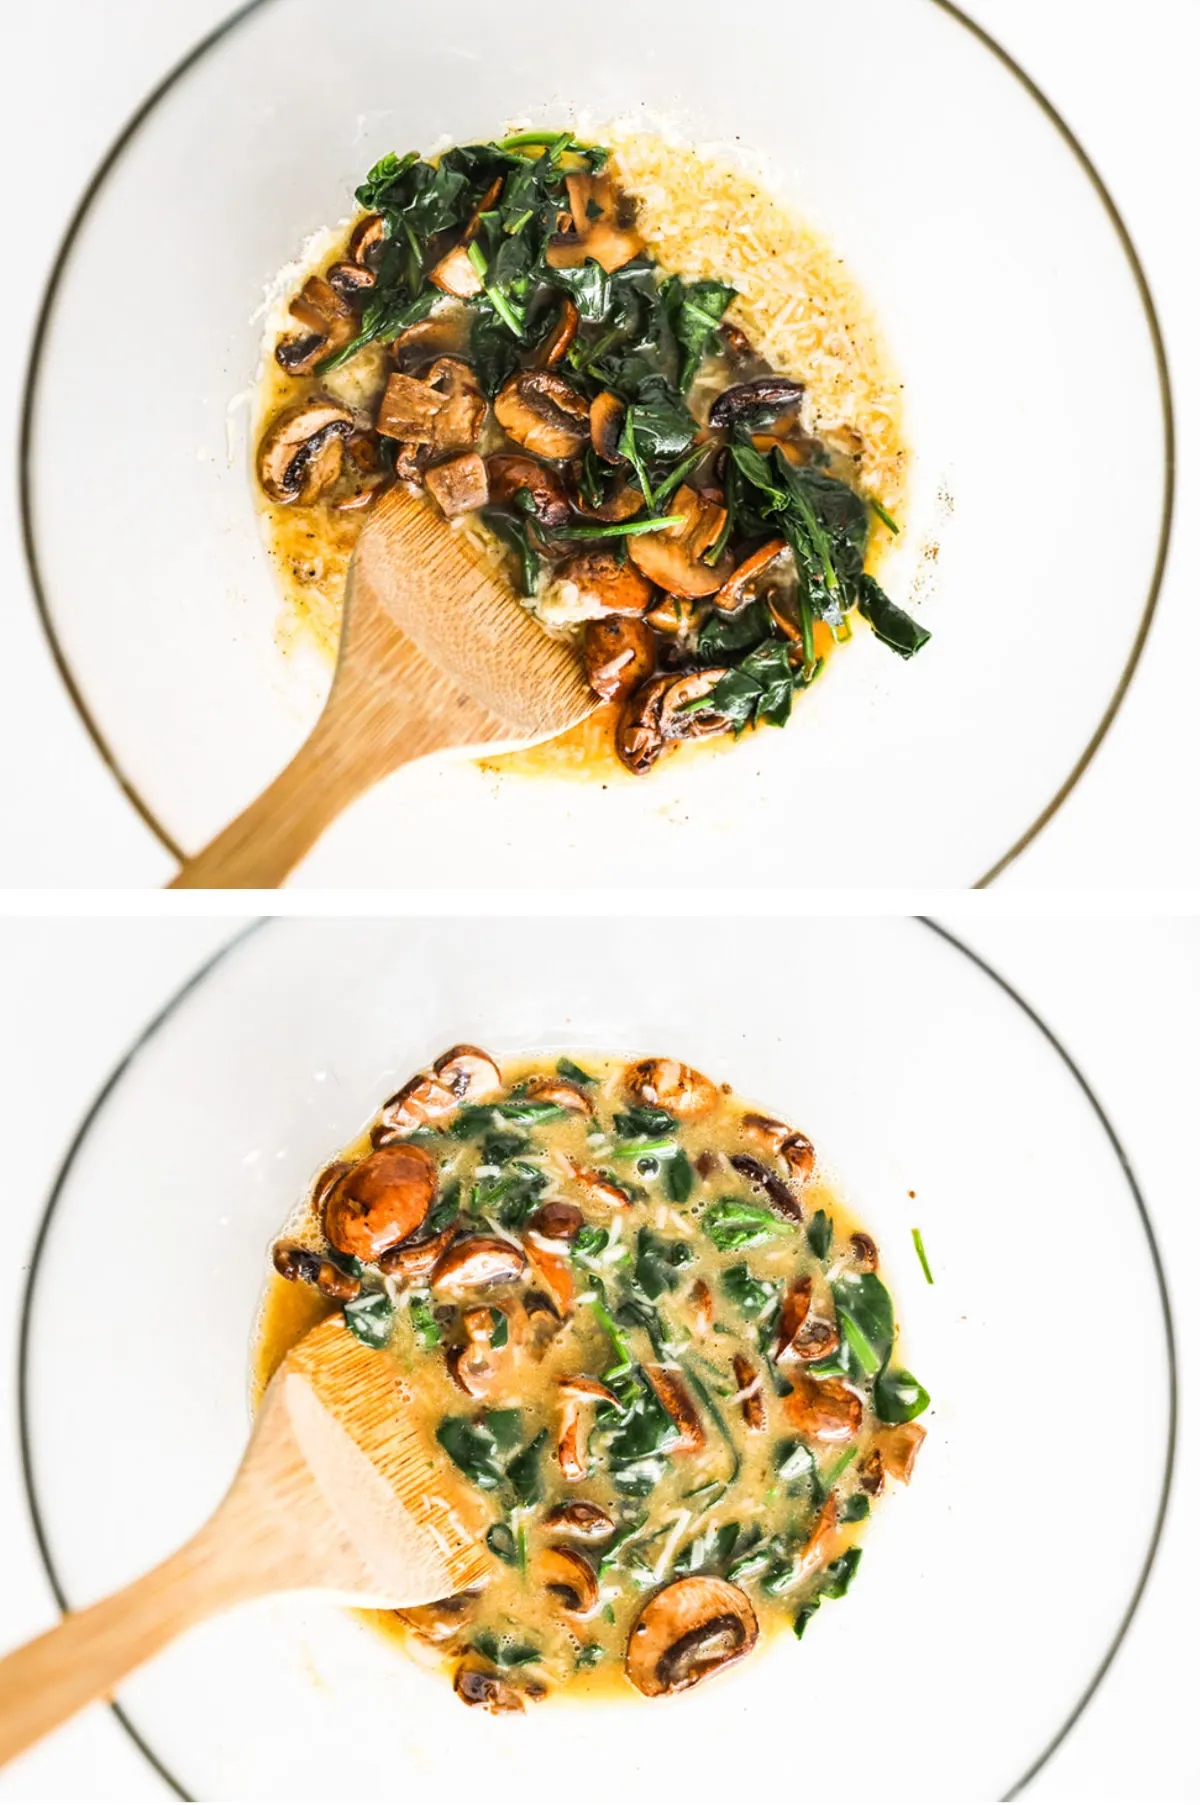 Two overhead images in one: 1. Sauteed mushrooms and spinach are added to egg mixture. 2. All ingredients are mixed. 